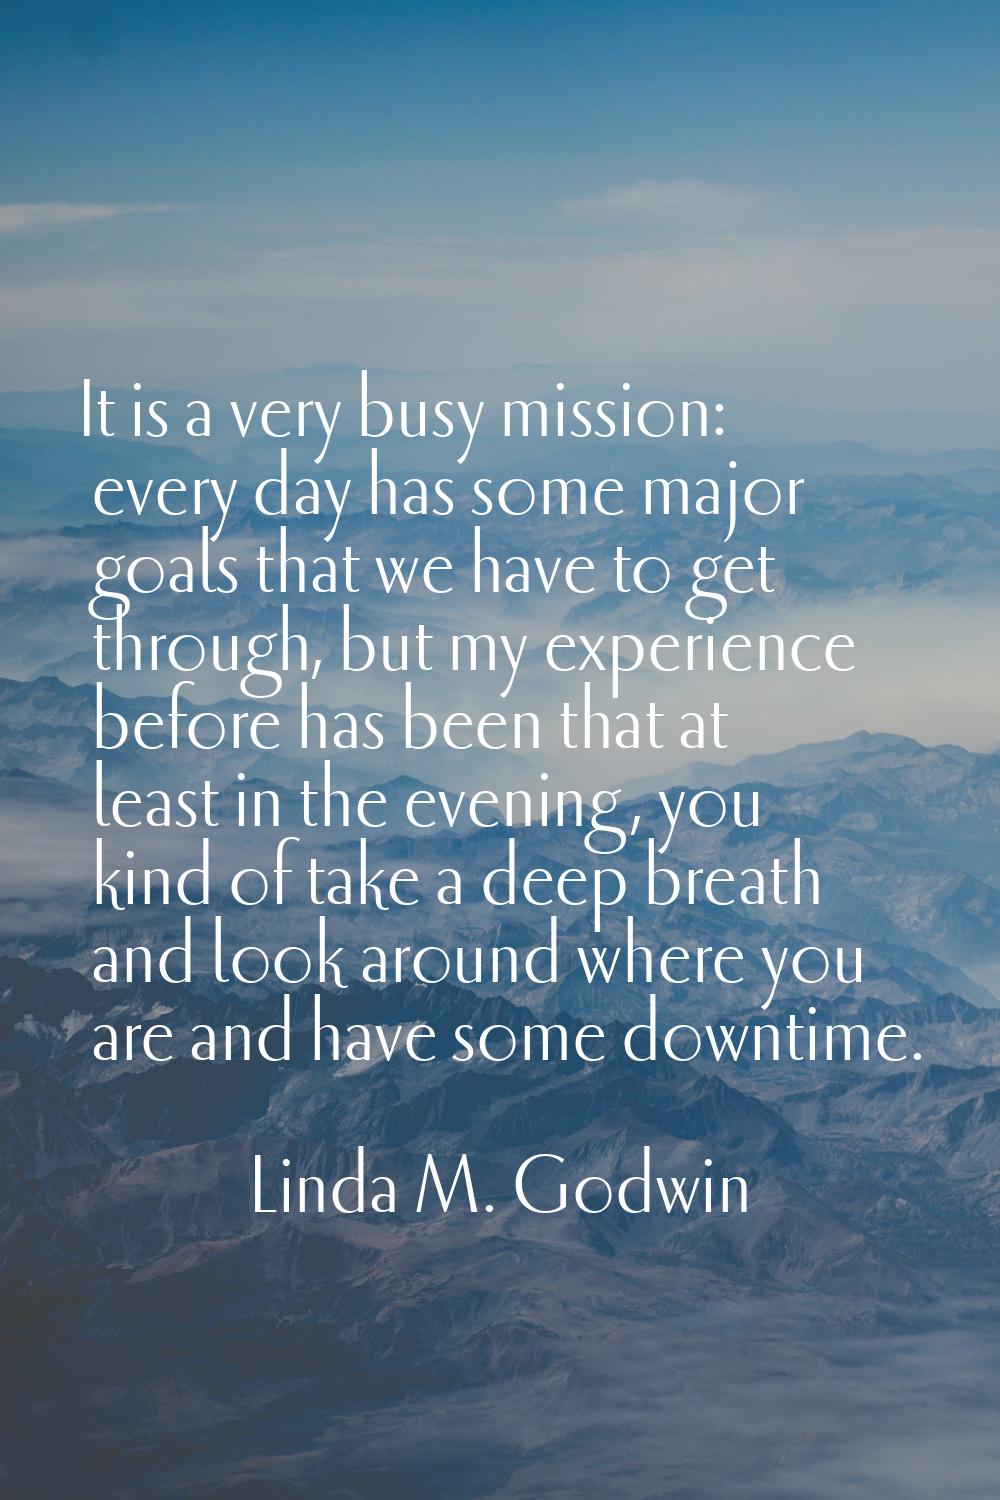 It is a very busy mission: every day has some major goals that we have to get through, but my exper